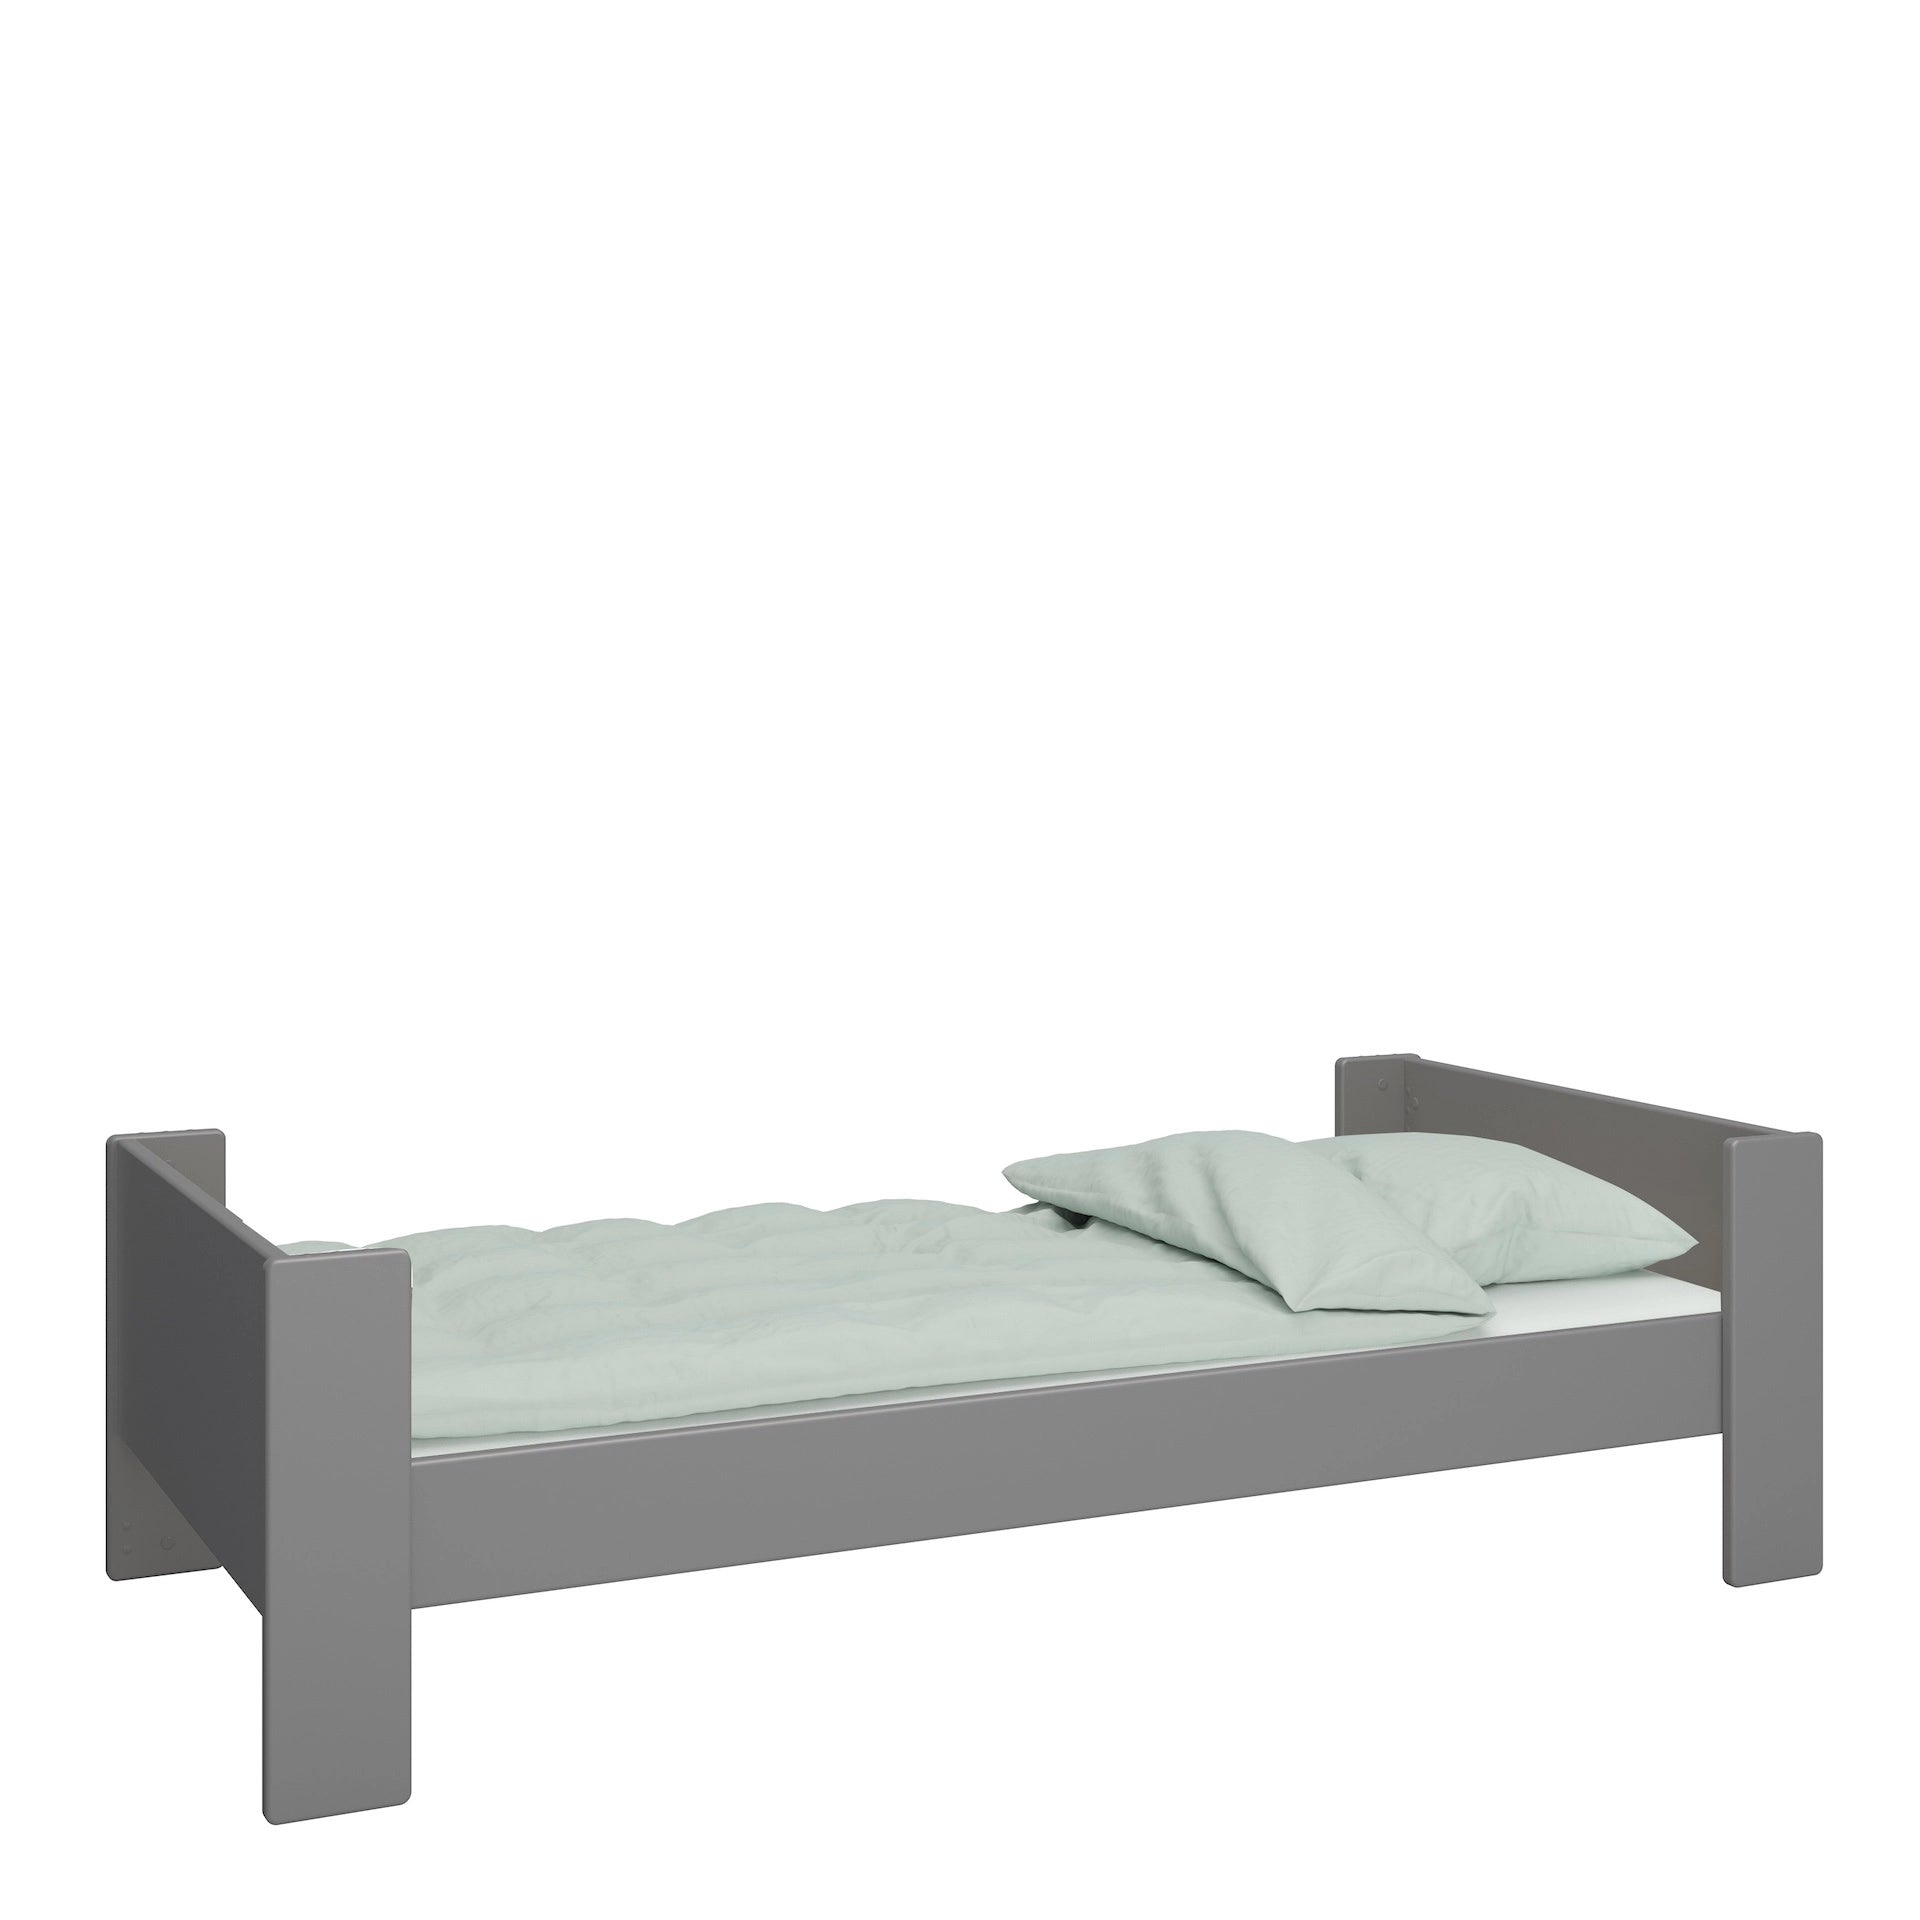 Furniture To Go Steens For Kids 3ft Single Bed, Includes - Under Bed Drawer Section 2 Drawers in Folkestone Grey